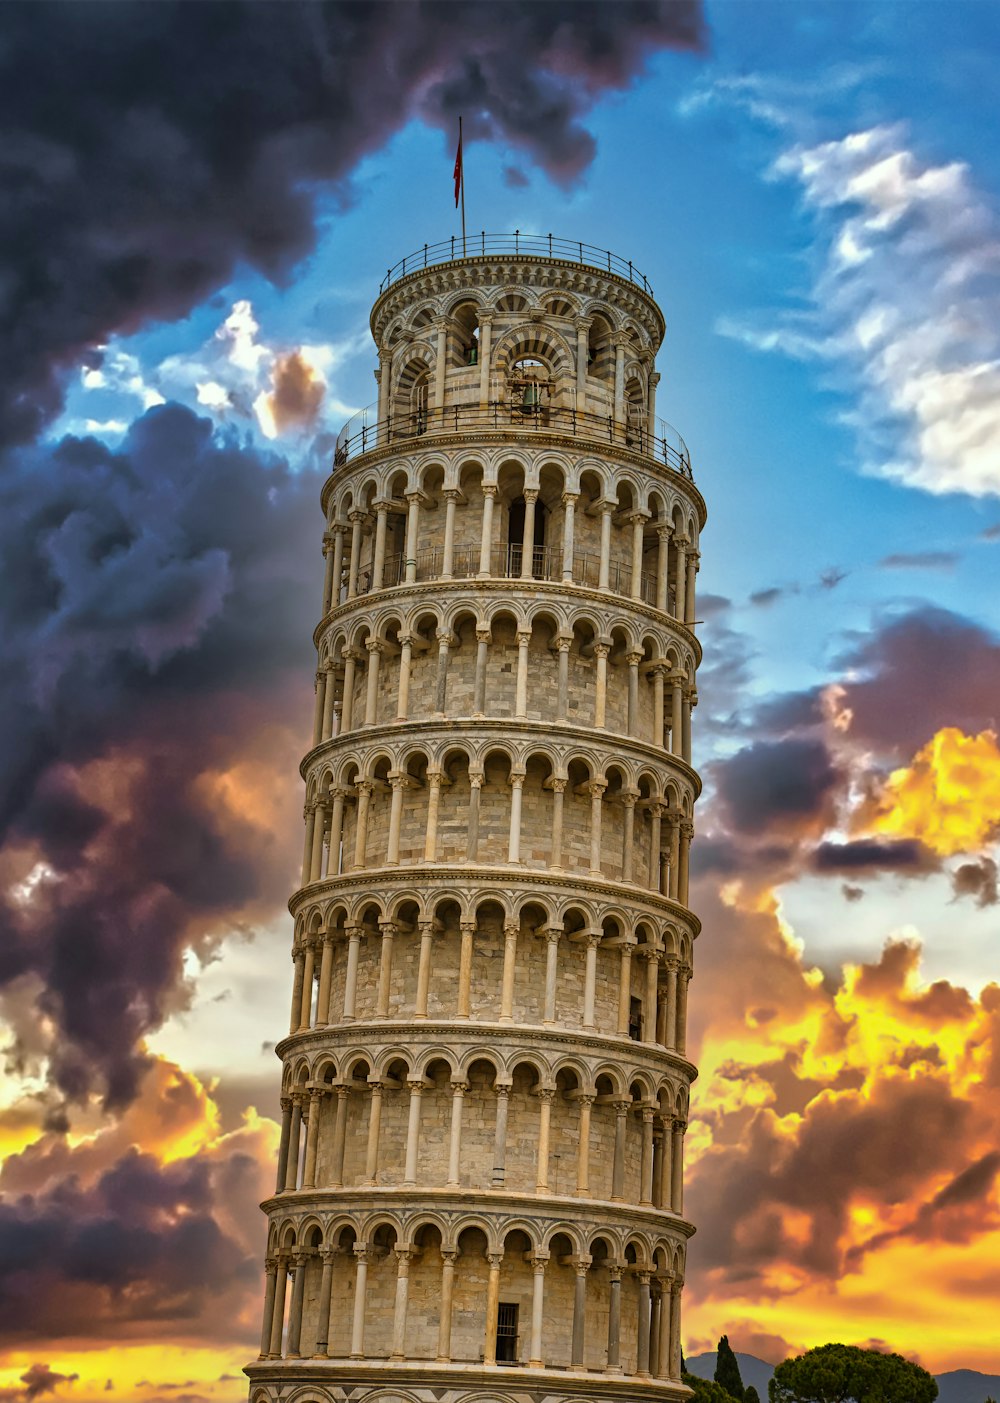 leaning tower of pisa under blue and white cloudy sky during daytime